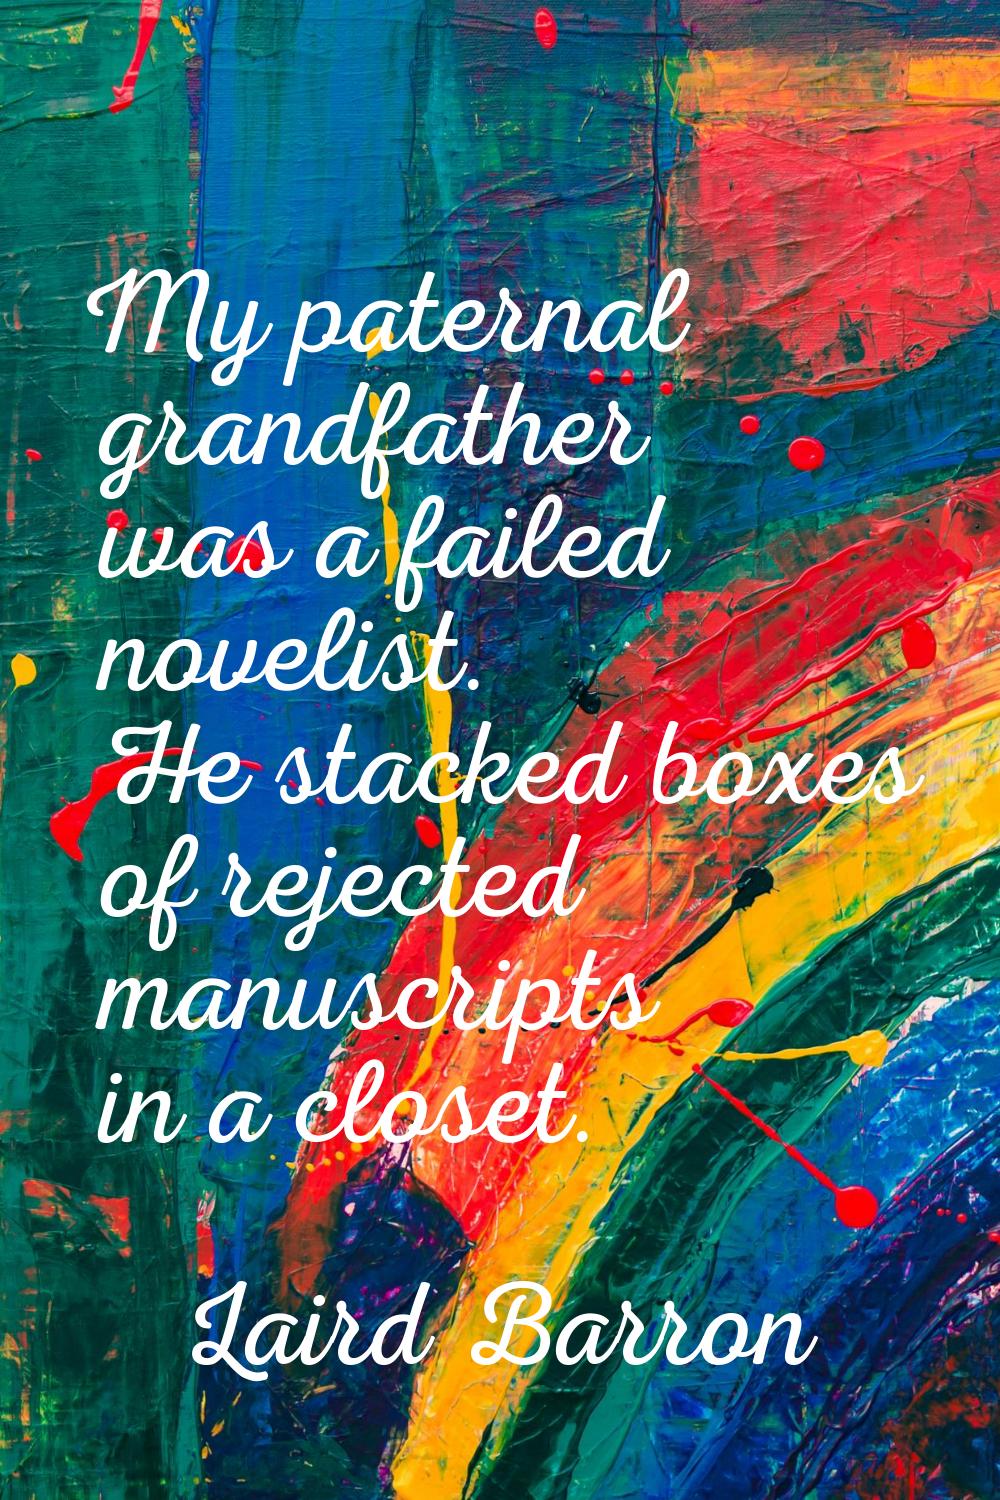 My paternal grandfather was a failed novelist. He stacked boxes of rejected manuscripts in a closet